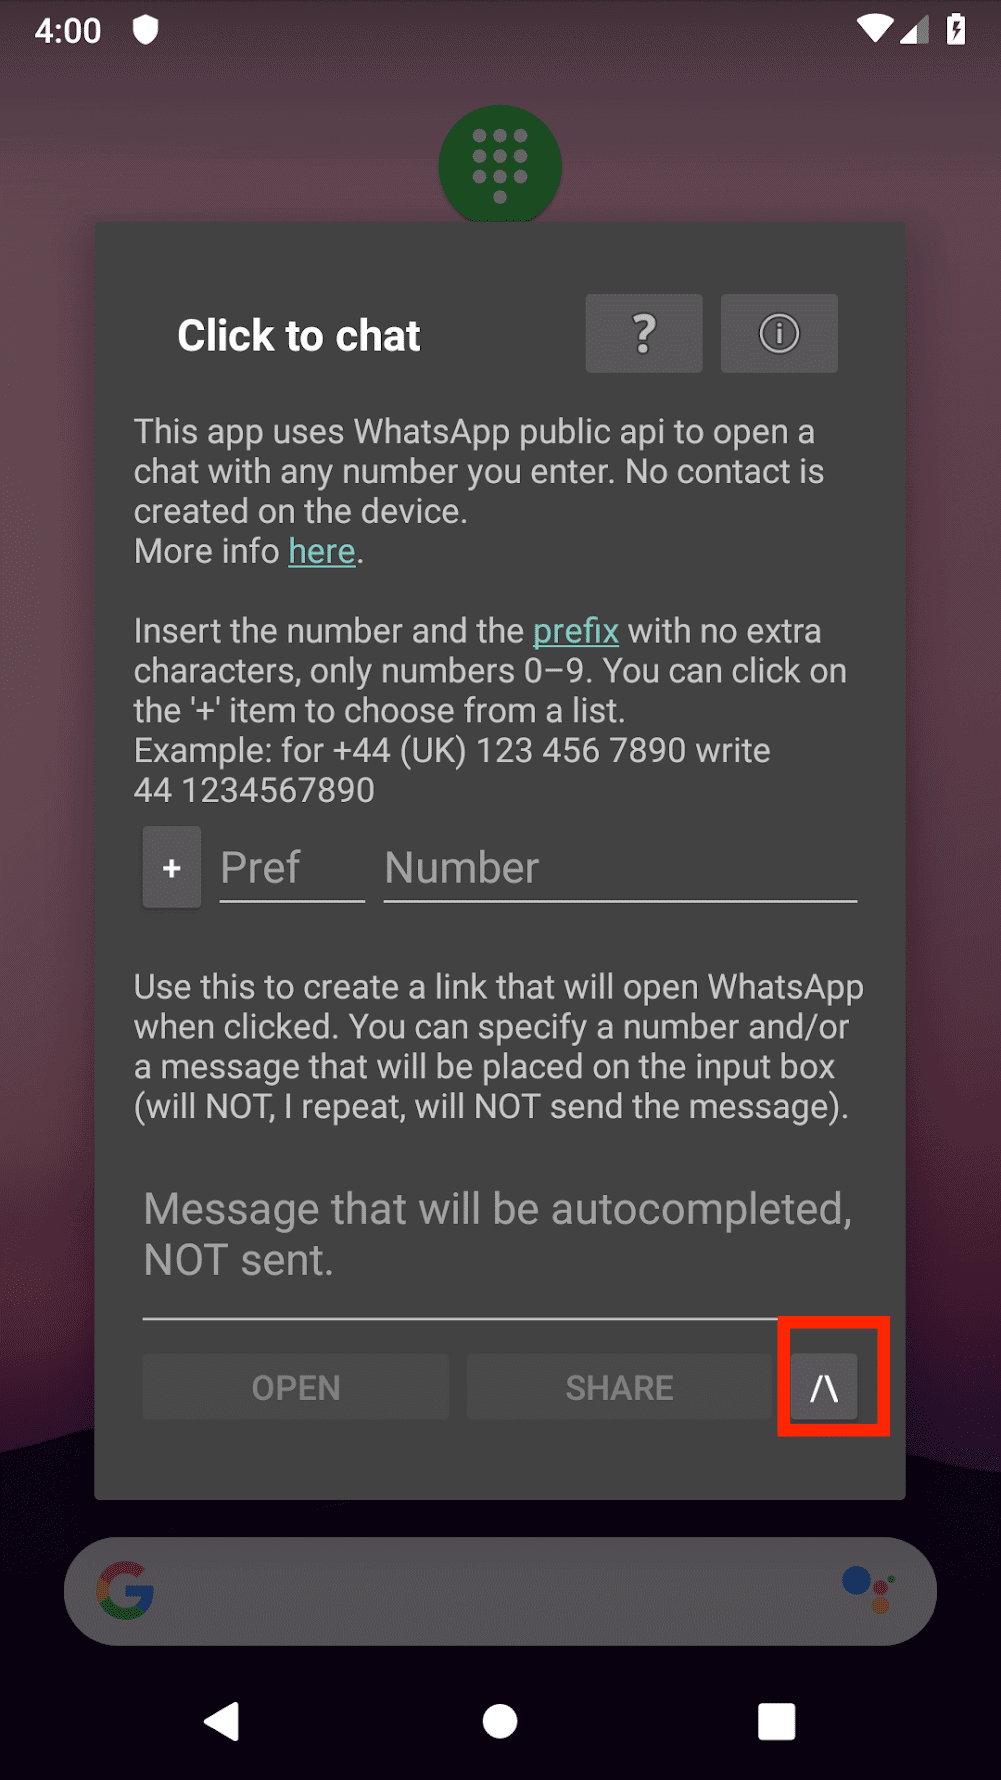 How to send WhatsApp message without saving the contact number on Android